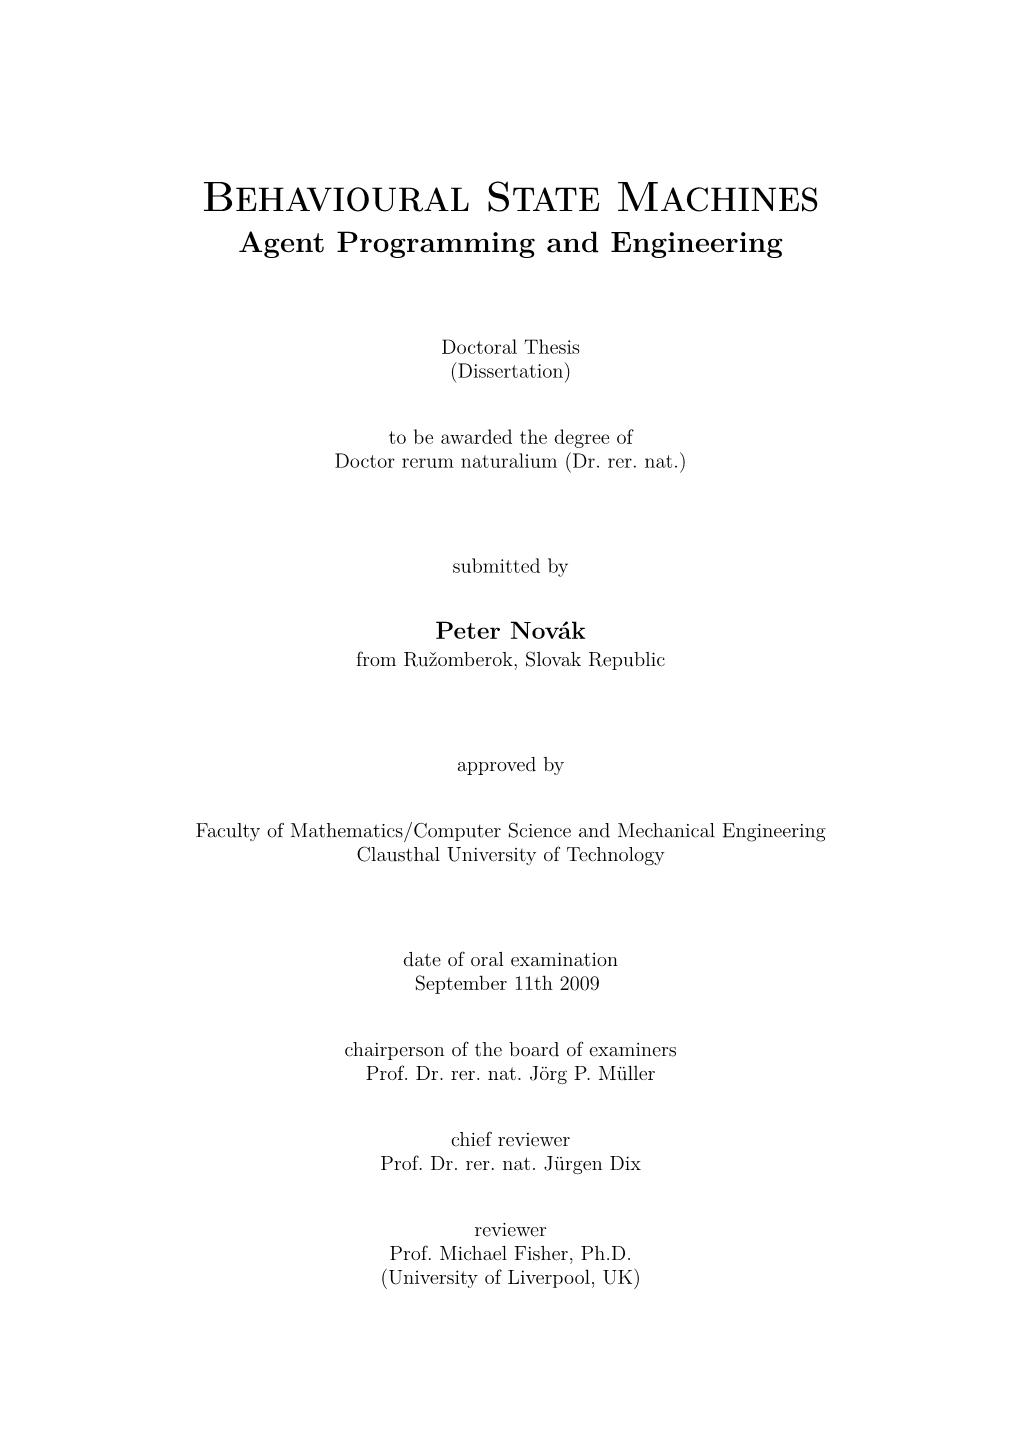 Behavioural State Machines: Agent Programming and Engineering